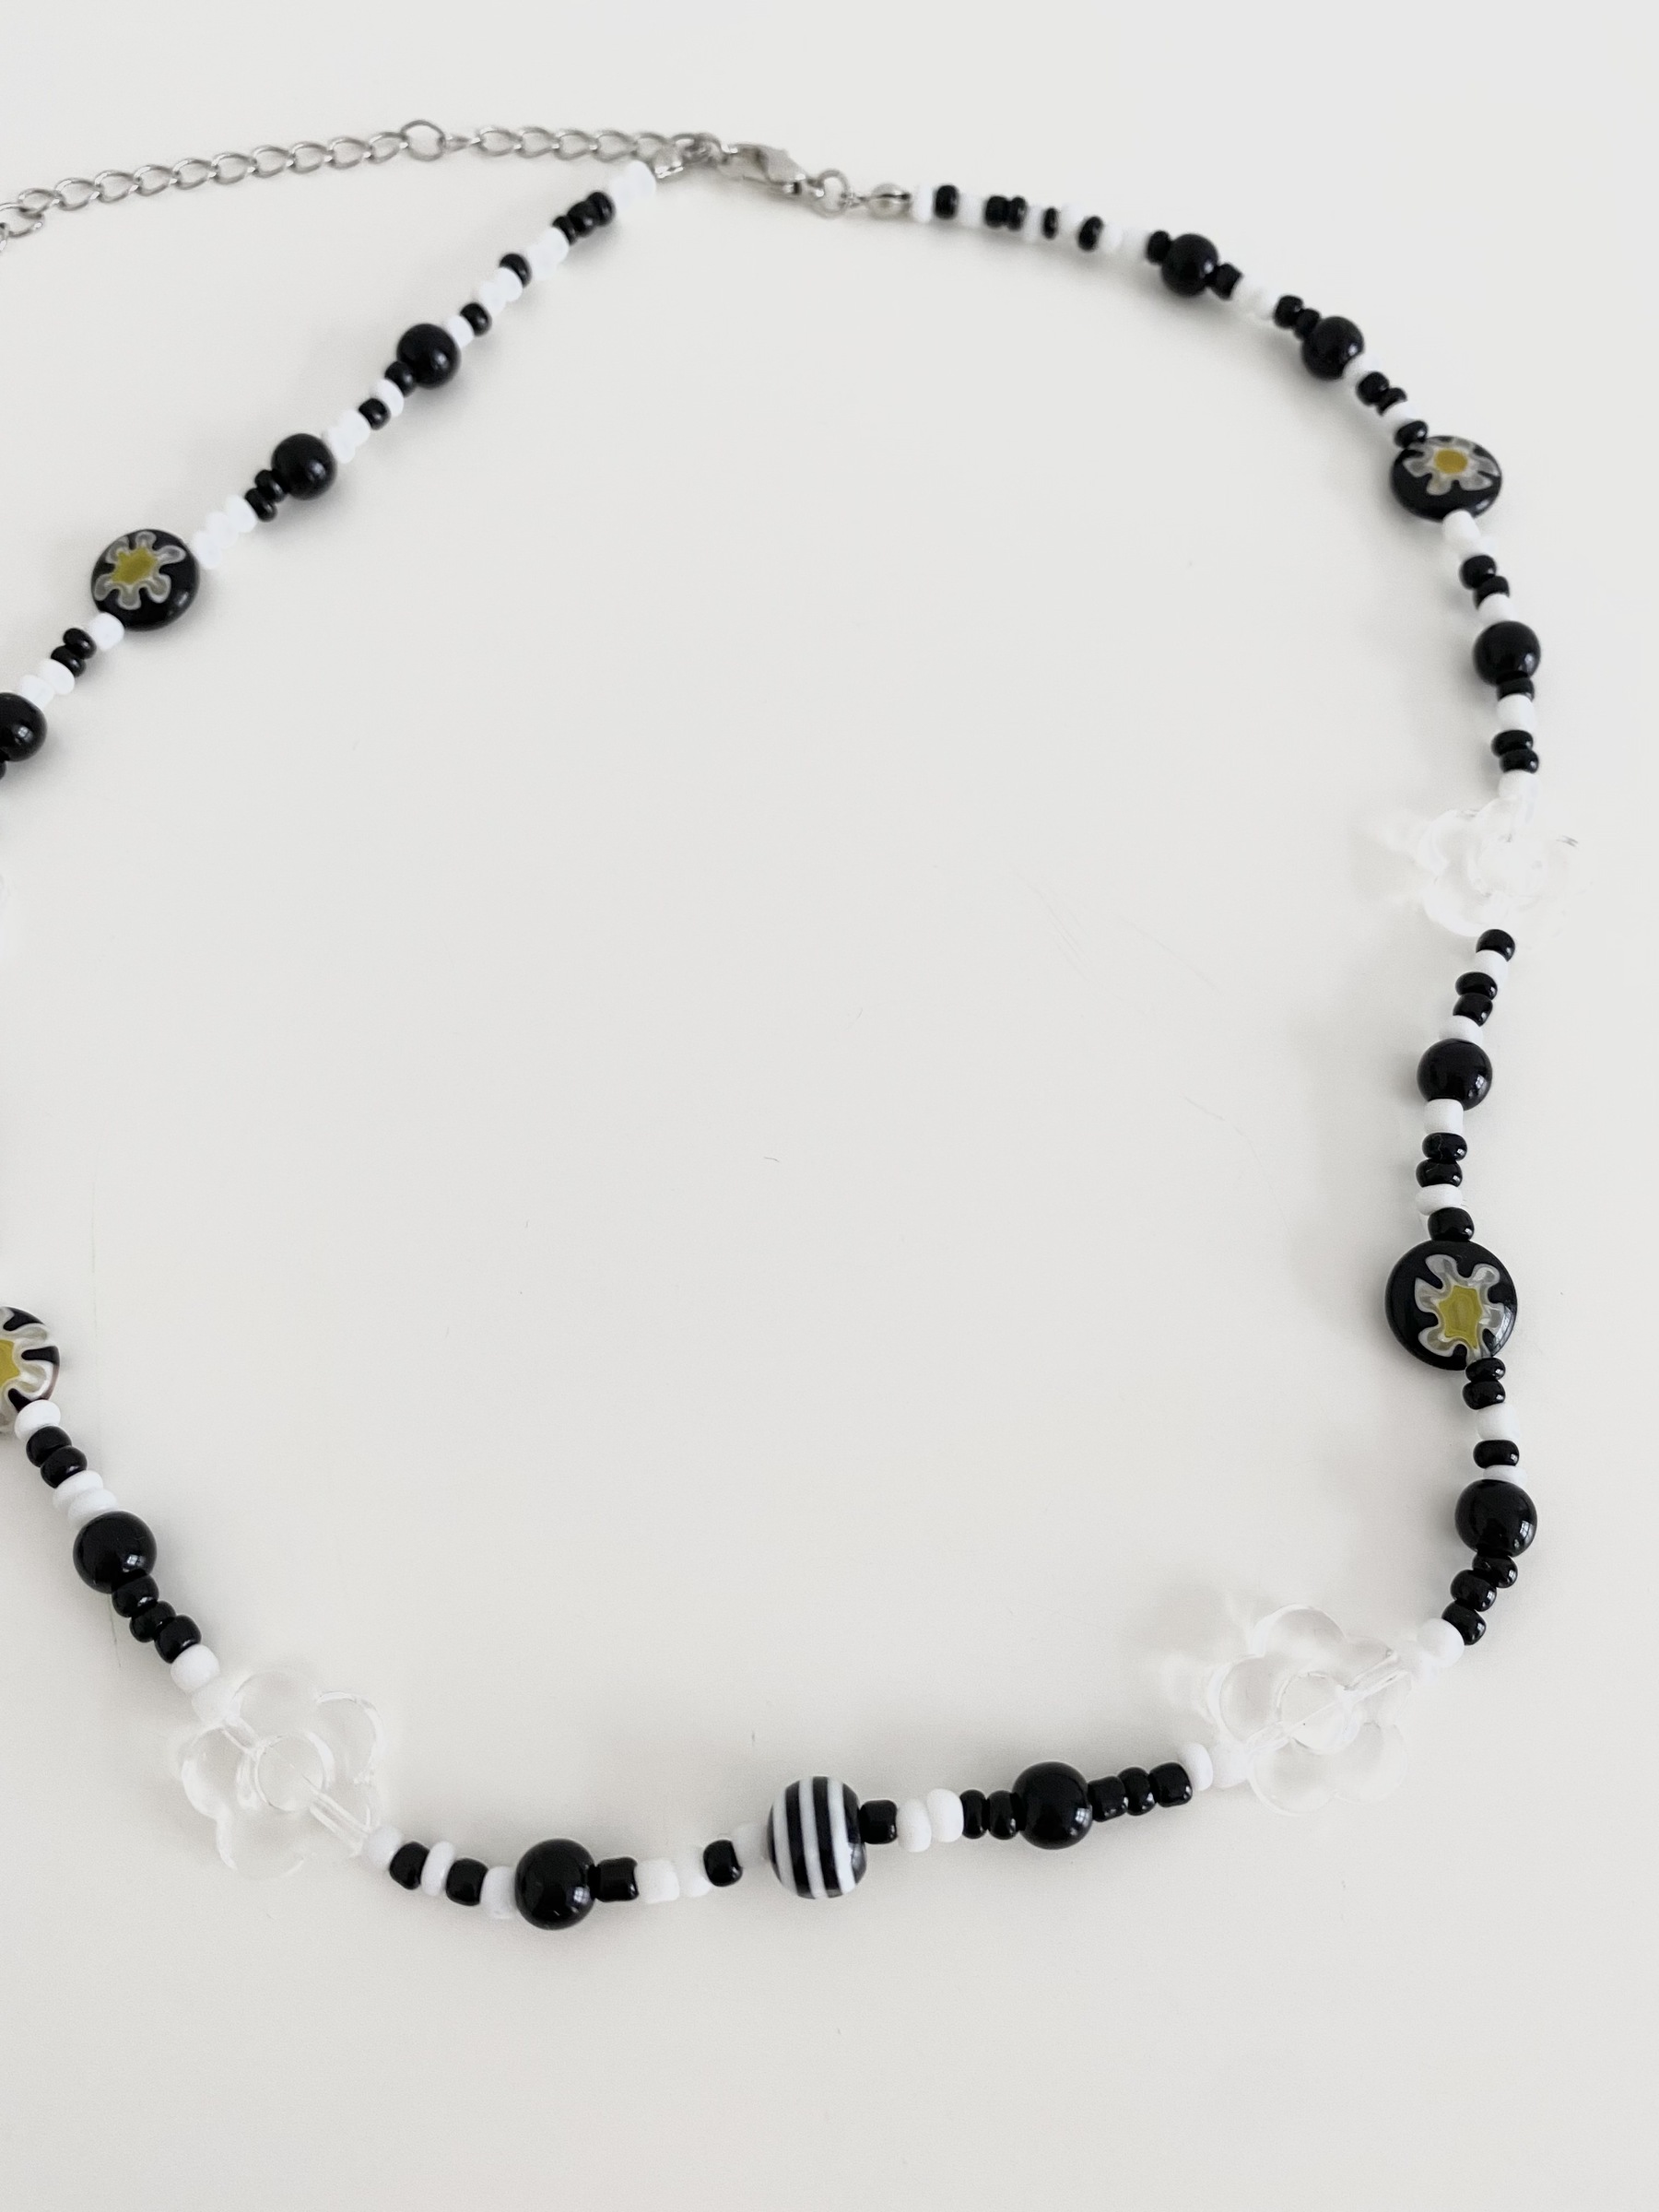 Single Strand Black and White Beaded Necklace Long or Short - Etsy |  Collares de cuentas, Collares unisex, Collares largos